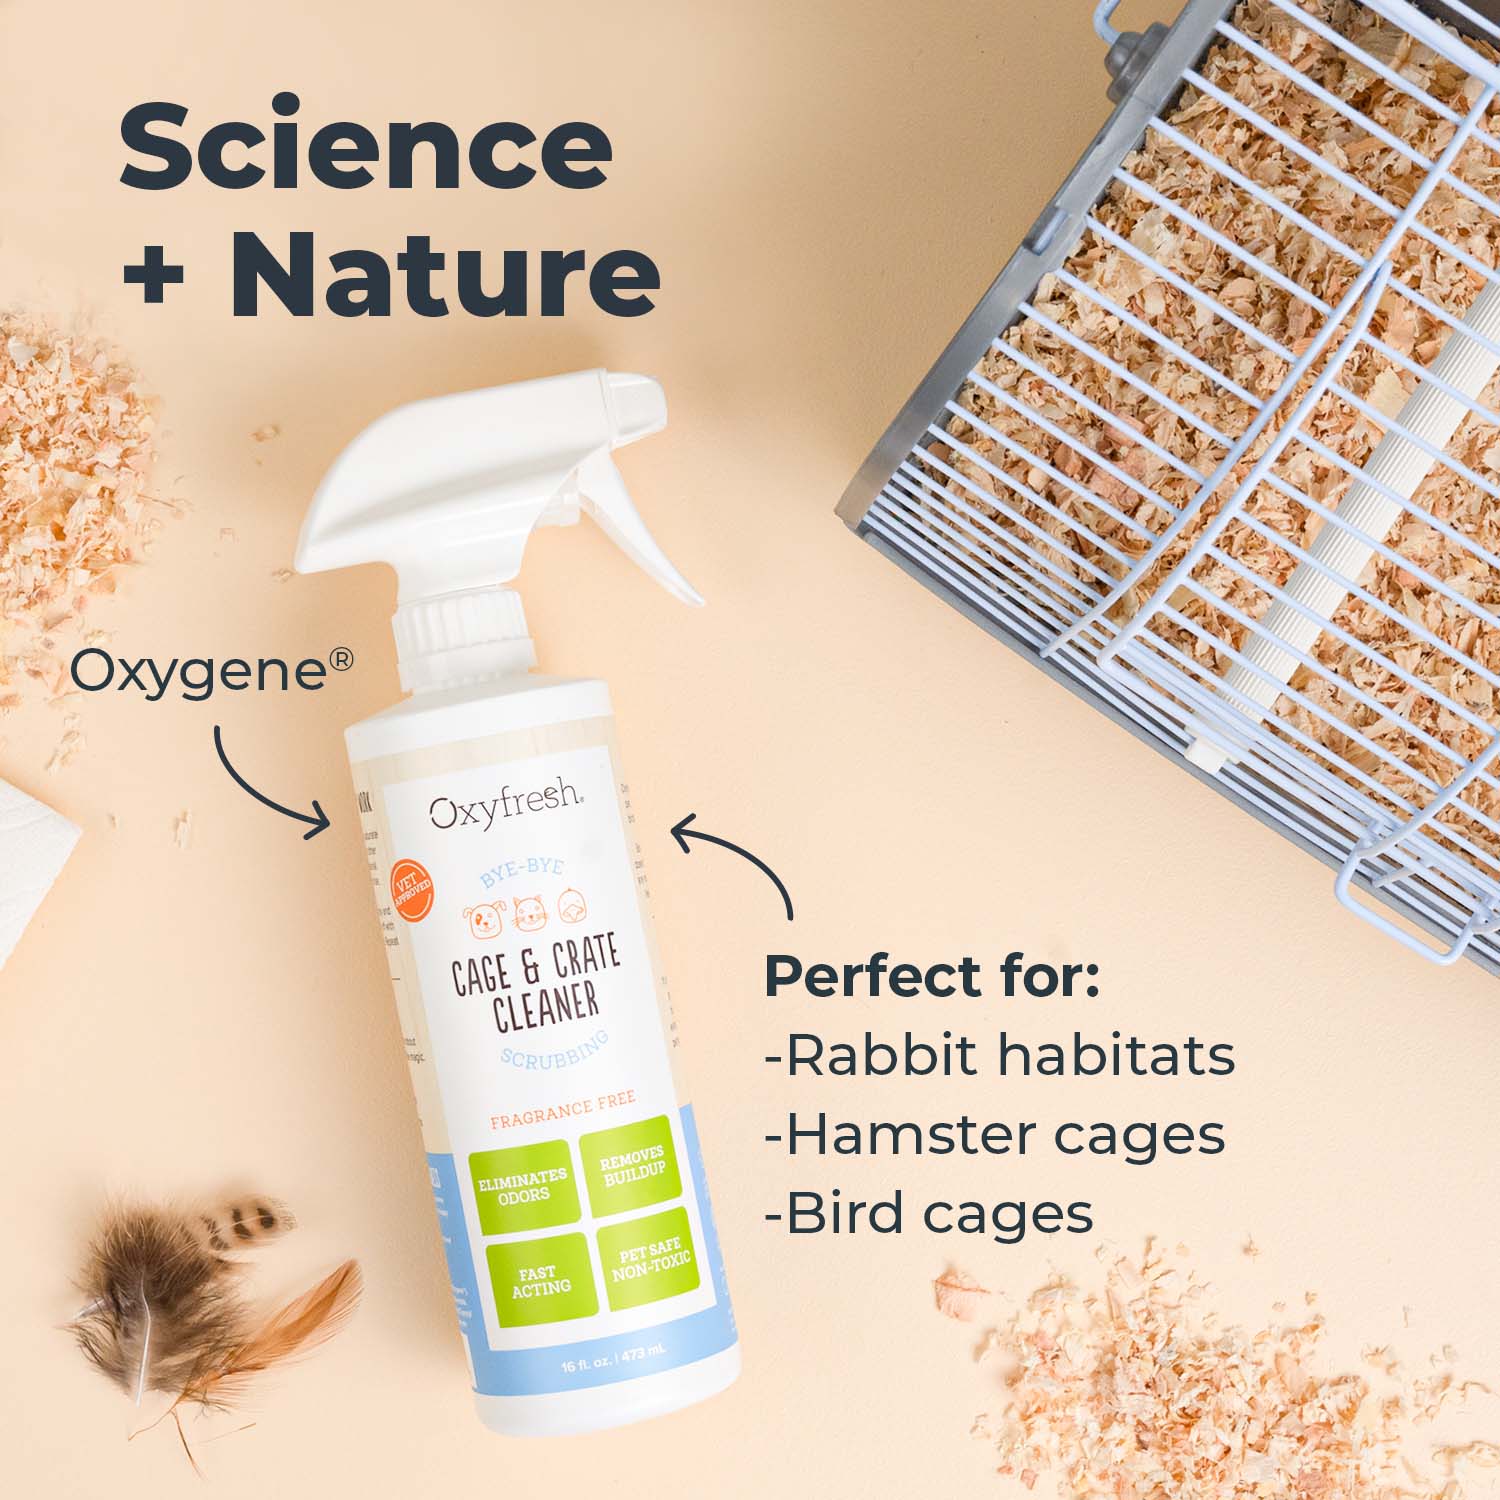 oxyfresh-cage-crate-cleaner-perfect-for-cleaning-rabbit-habitats-hamster-cages-and-bird-cages